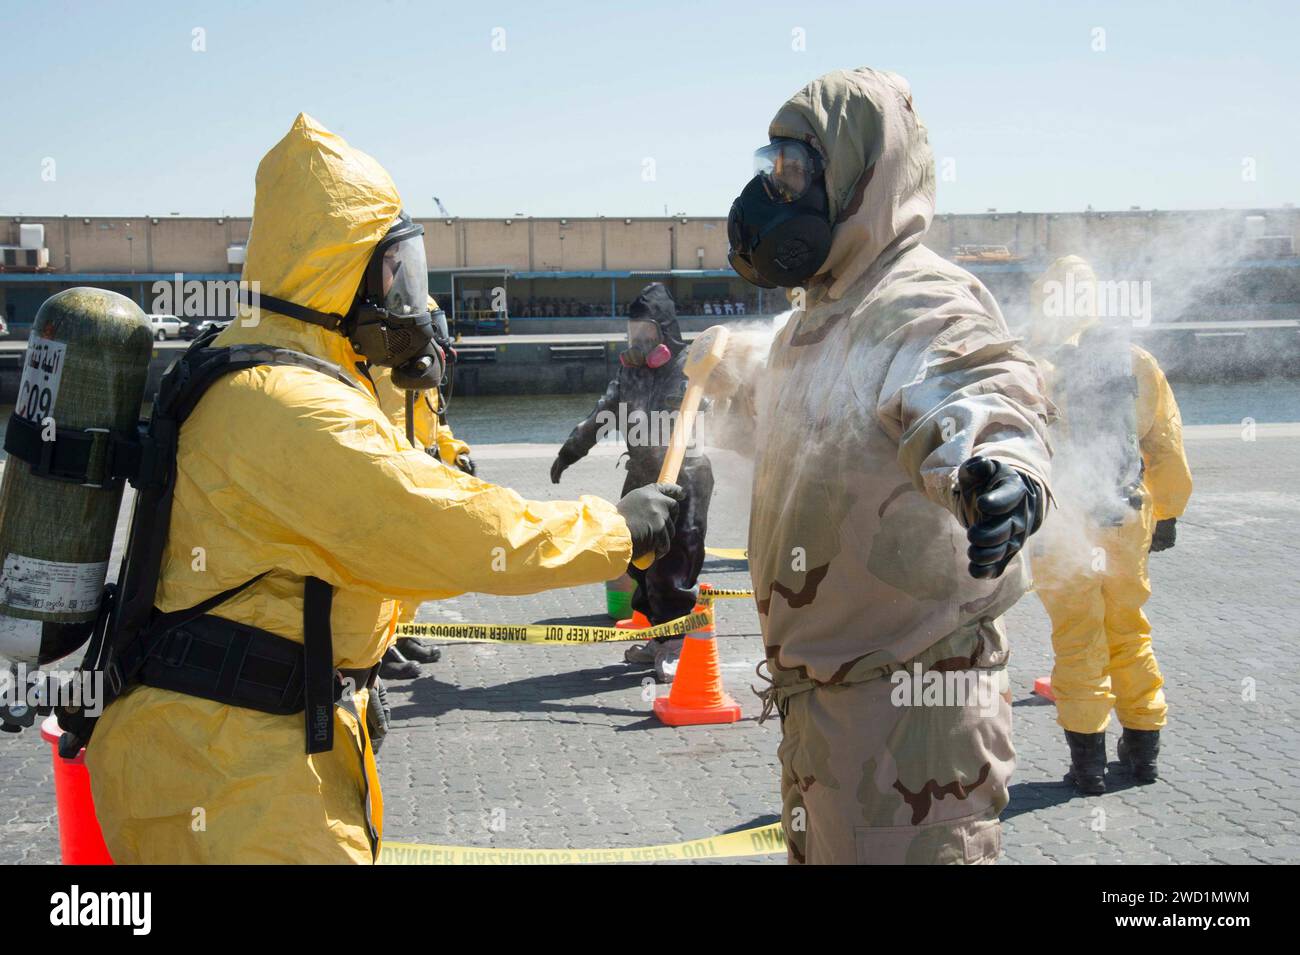 Emergency responders conduct a joint chemical, biological, radiological and nuclear defense detection. Stock Photo